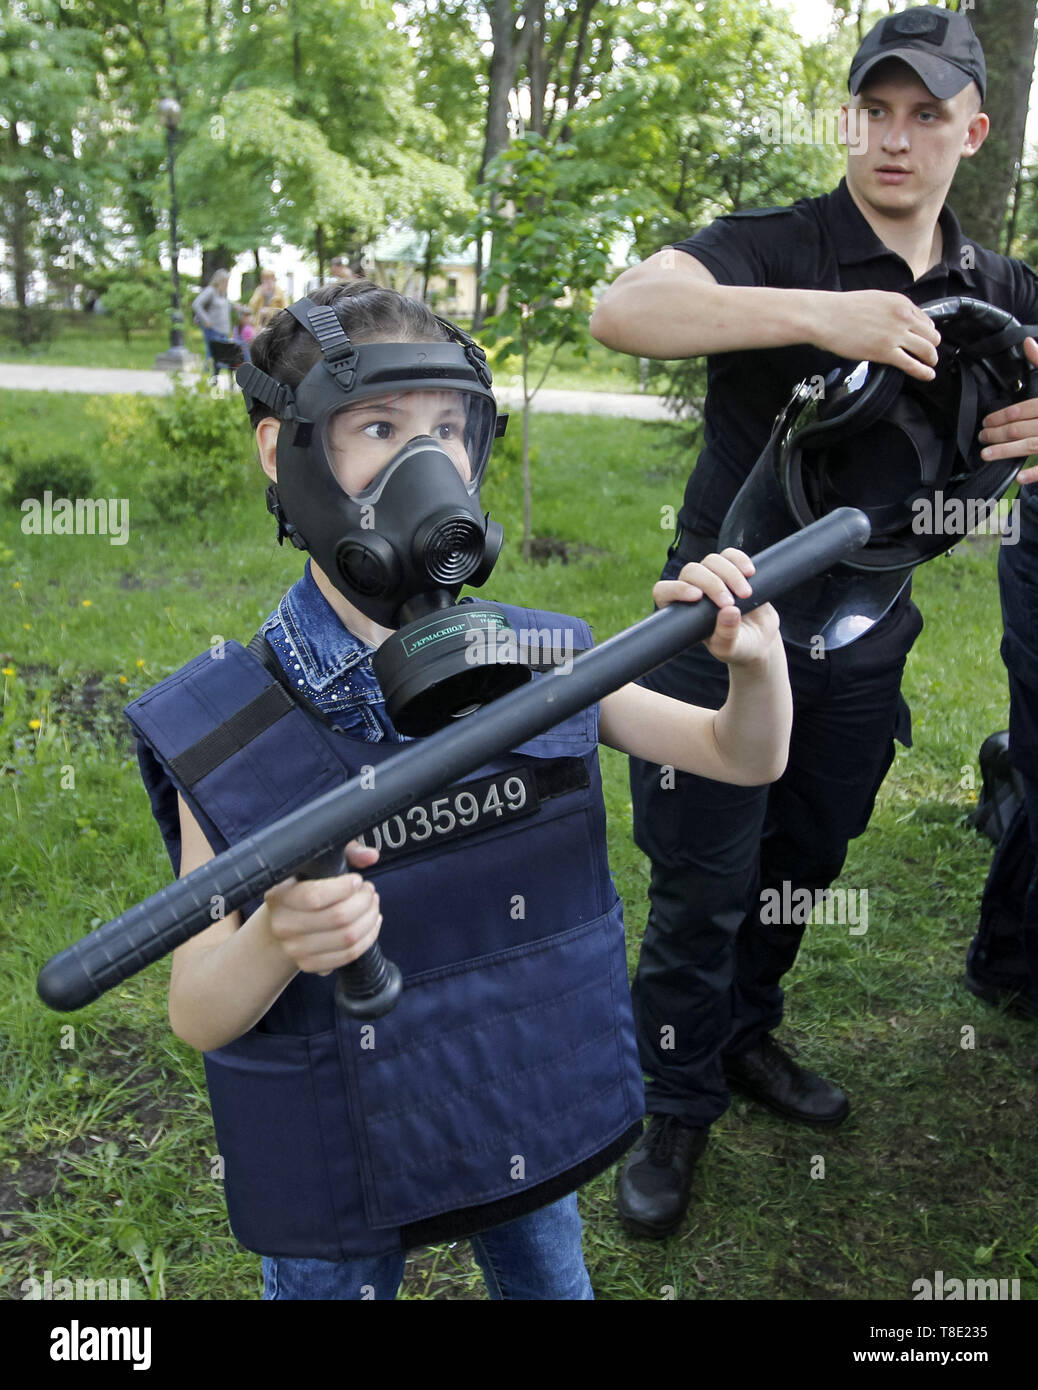 Kiev, Ukraine. 12th May, 2019. A little girl poses for a photo wearing riot police equipment during 'City of professions' children's festival in Kiev, Ukraine, on 12 May 2019. The City of Professions is a children's career-oriented festival whose goal is to provide children to try themselves in different professions - rescuers, firemen, bomb experts, policemen, doctors, social workers, criminologists, aircraft designer, atomic engineer, a businessman, a scientist, and others. Credit: Serg Glovny/ZUMA Wire/Alamy Live News Stock Photo